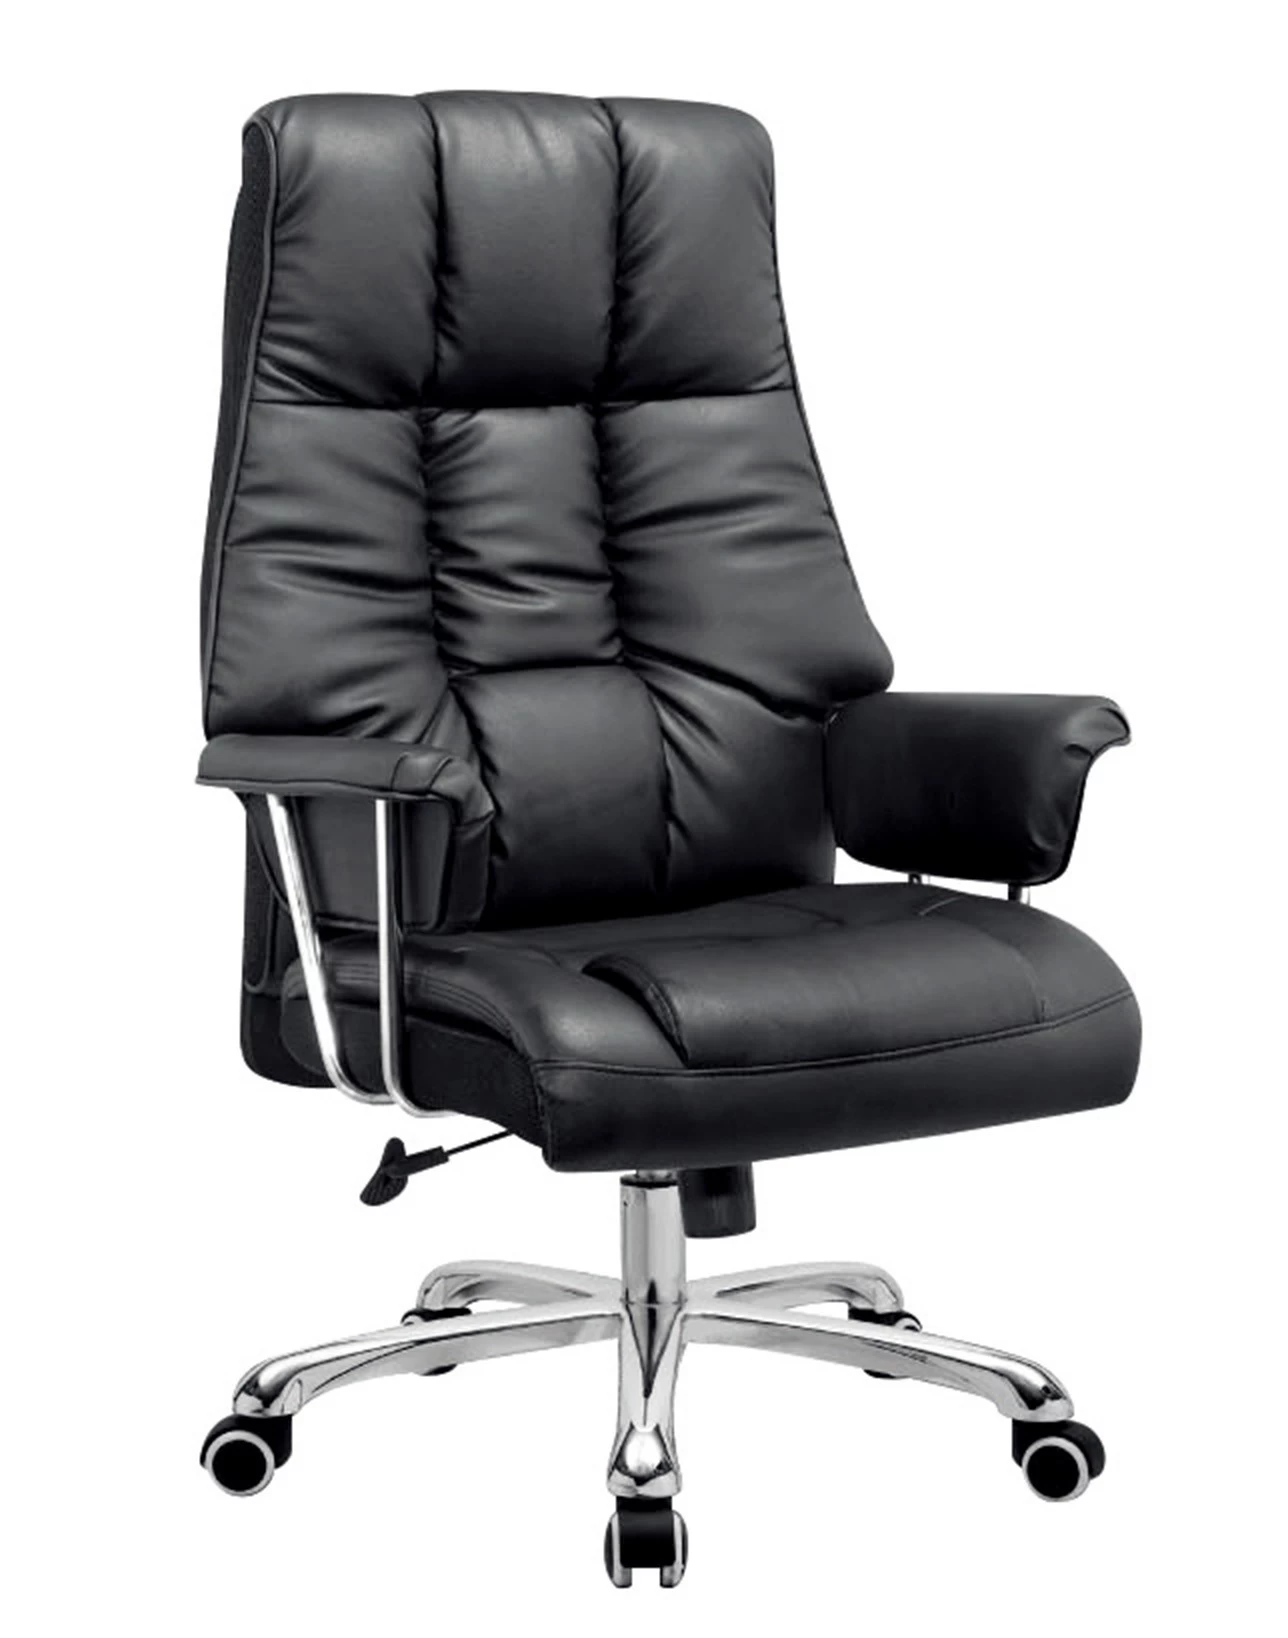 Newcity 6622A Boss Swivel Office Chair Hot Sale In Market Office Chair Good Looking Manager Office Chair Polyster Office Chair Supplier Foshan China